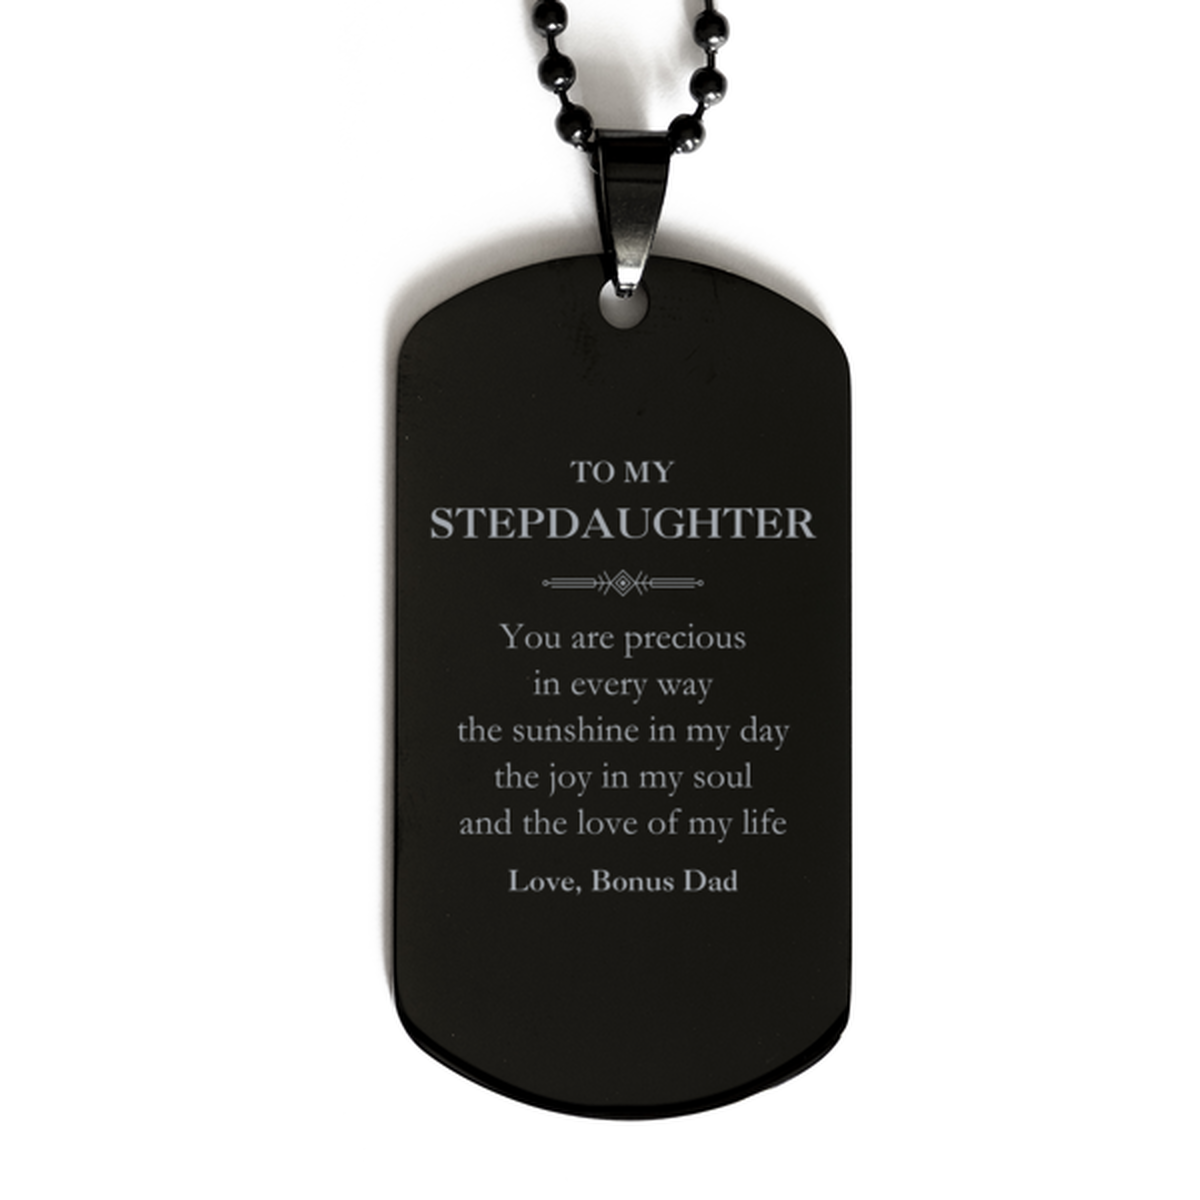 Graduation Gifts for Stepdaughter Black Dog Tag Present from Bonus Dad, Christmas Stepdaughter Birthday Gifts Stepdaughter You are precious in every way the sunshine in my day. Love, Bonus Dad